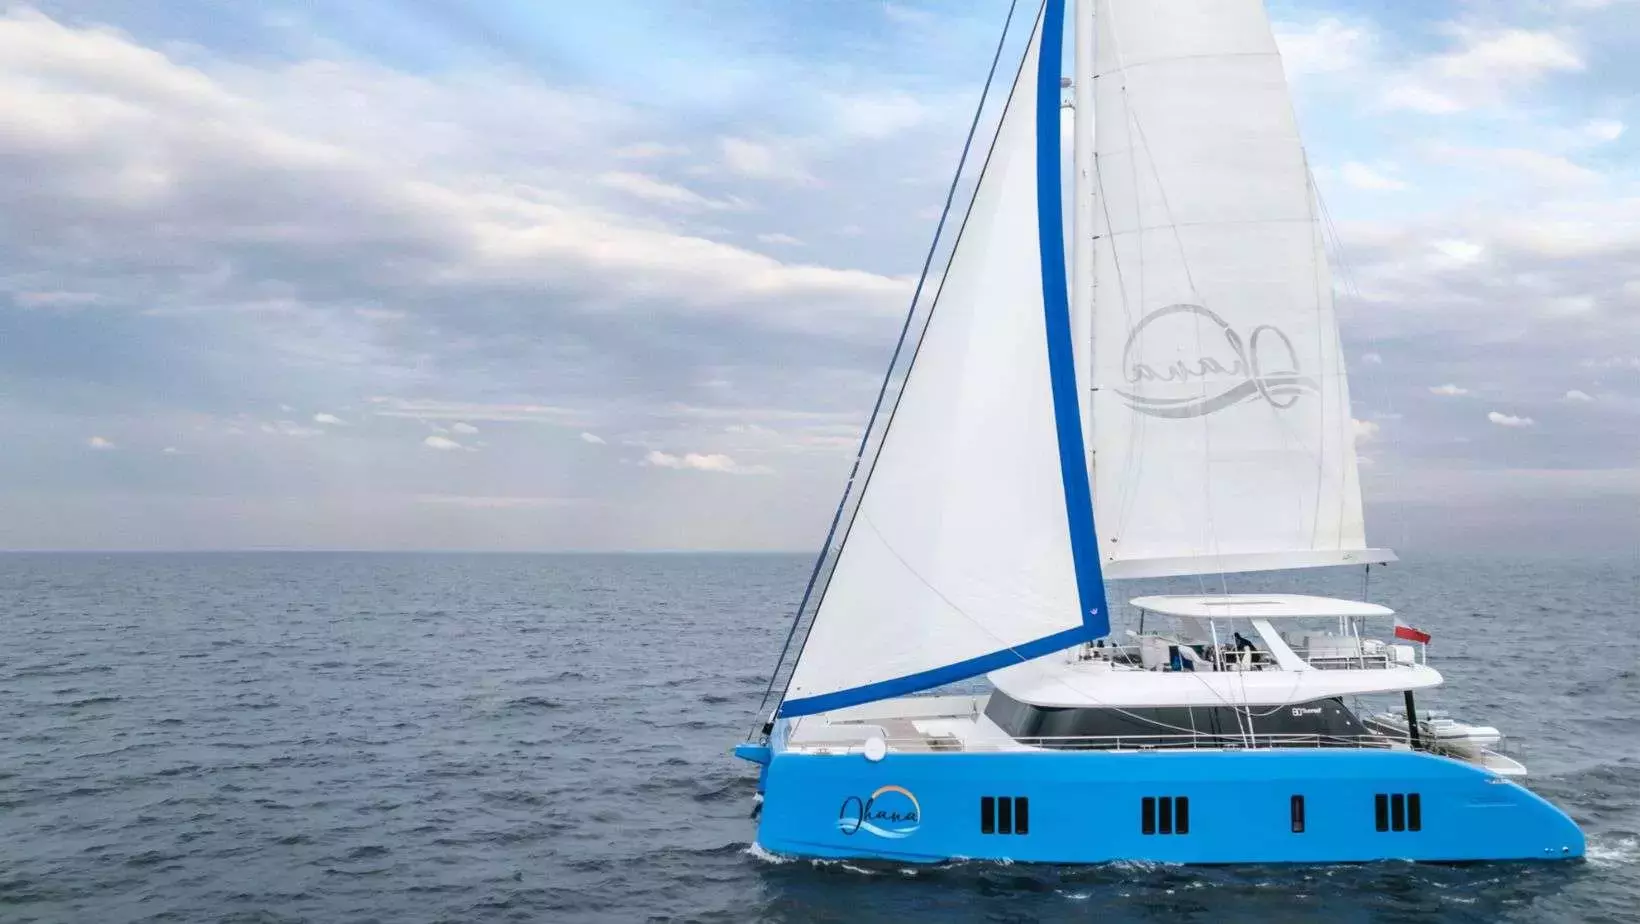 Ohana II by Sunreef Yachts - Top rates for a Charter of a private Luxury Catamaran in Barbados